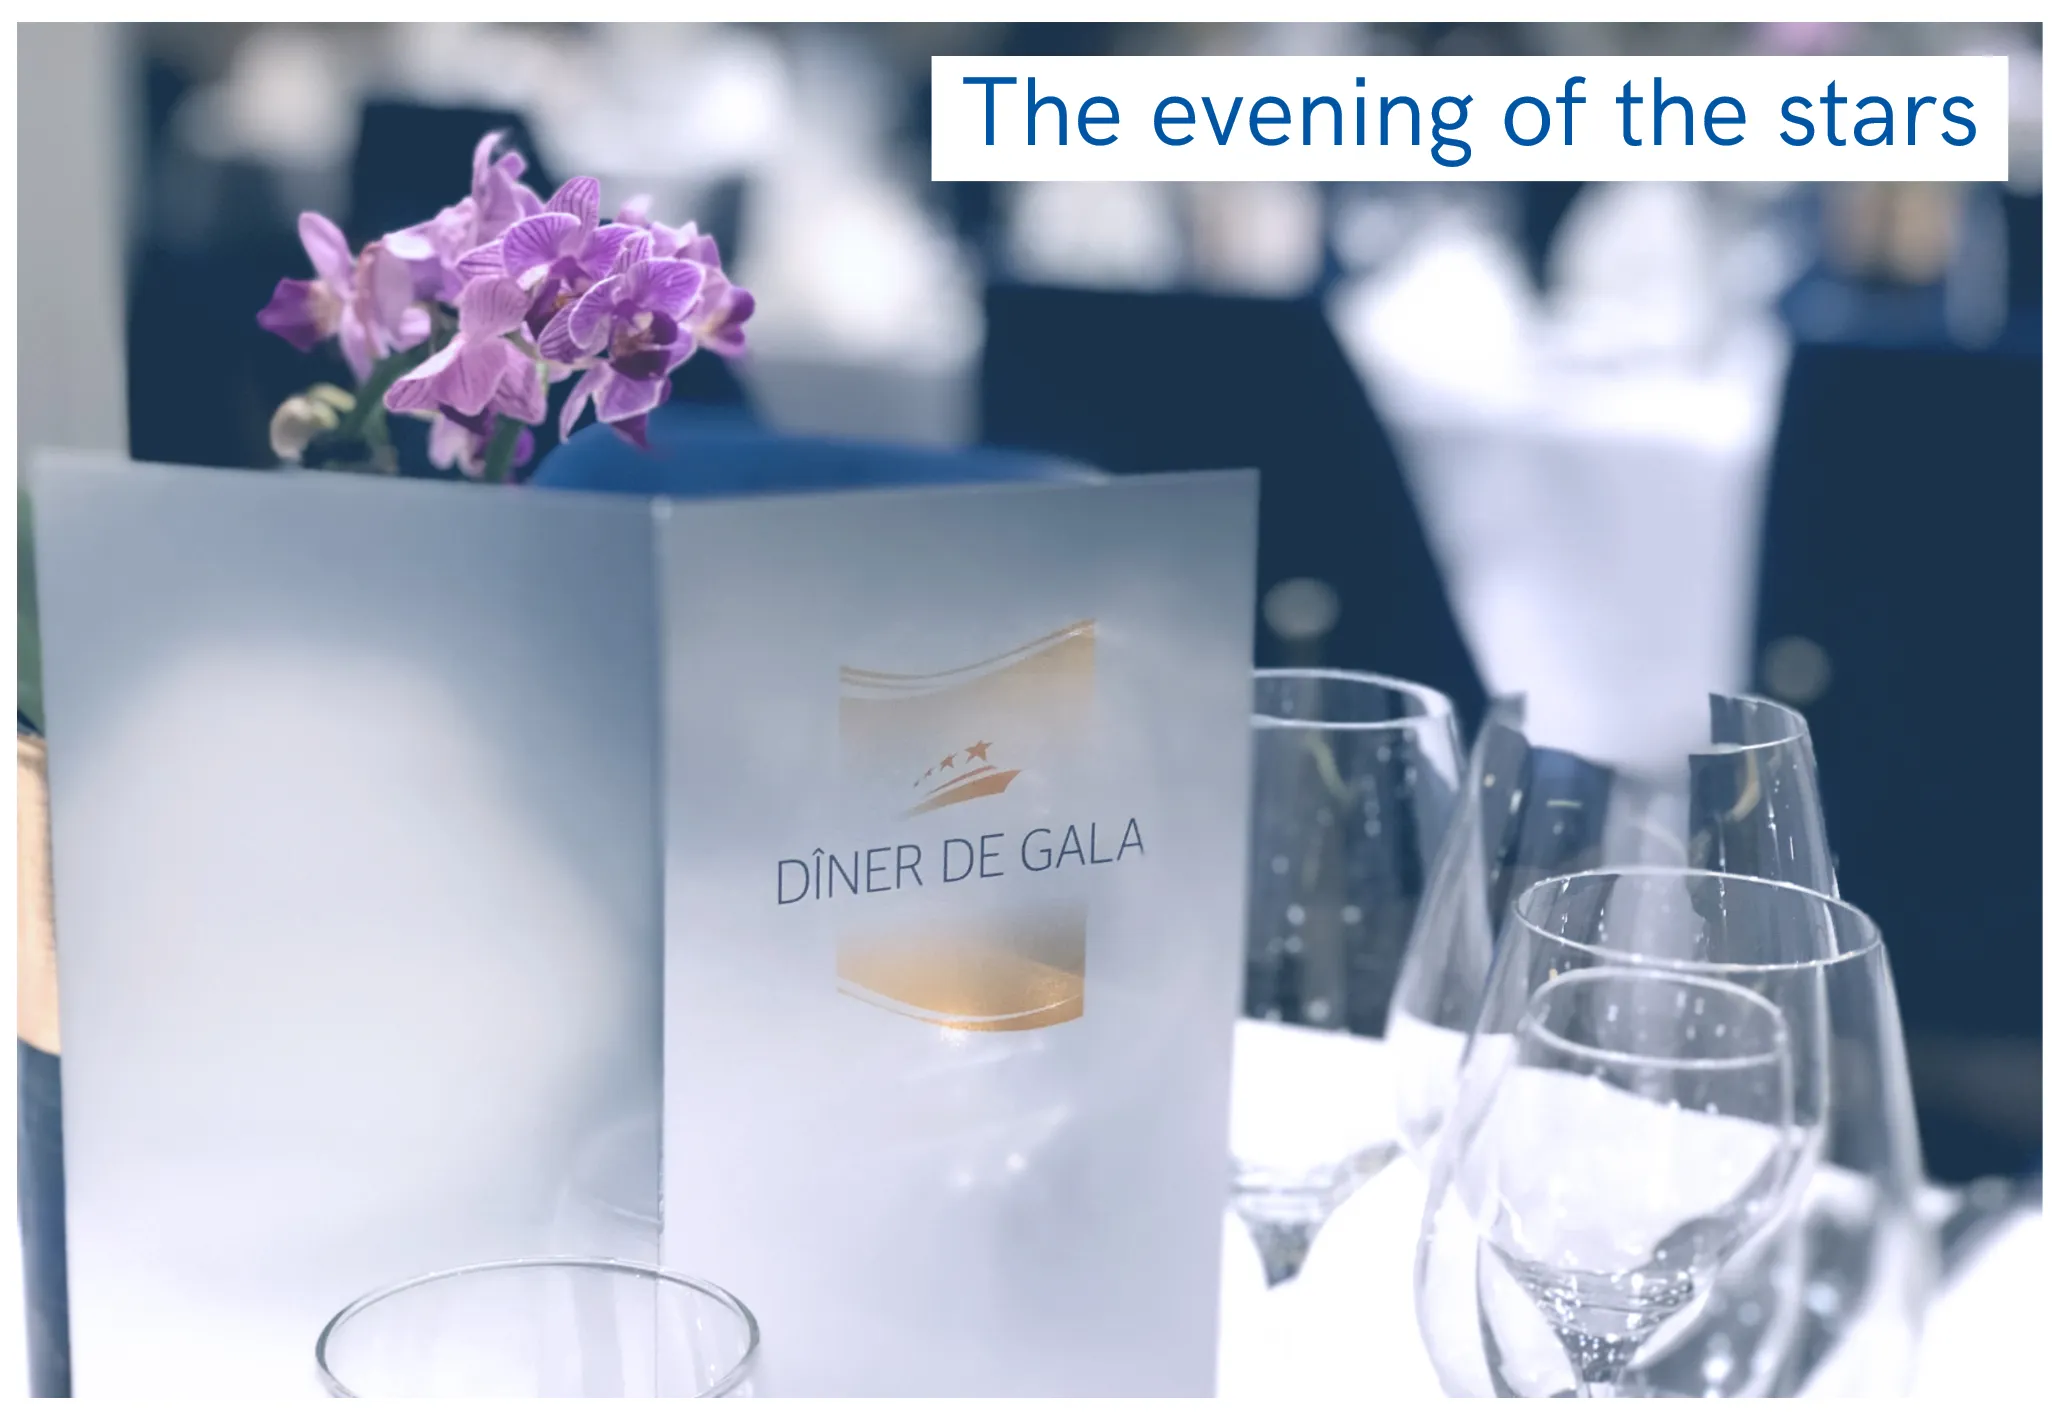 The evening of the stars with CroisiEurope